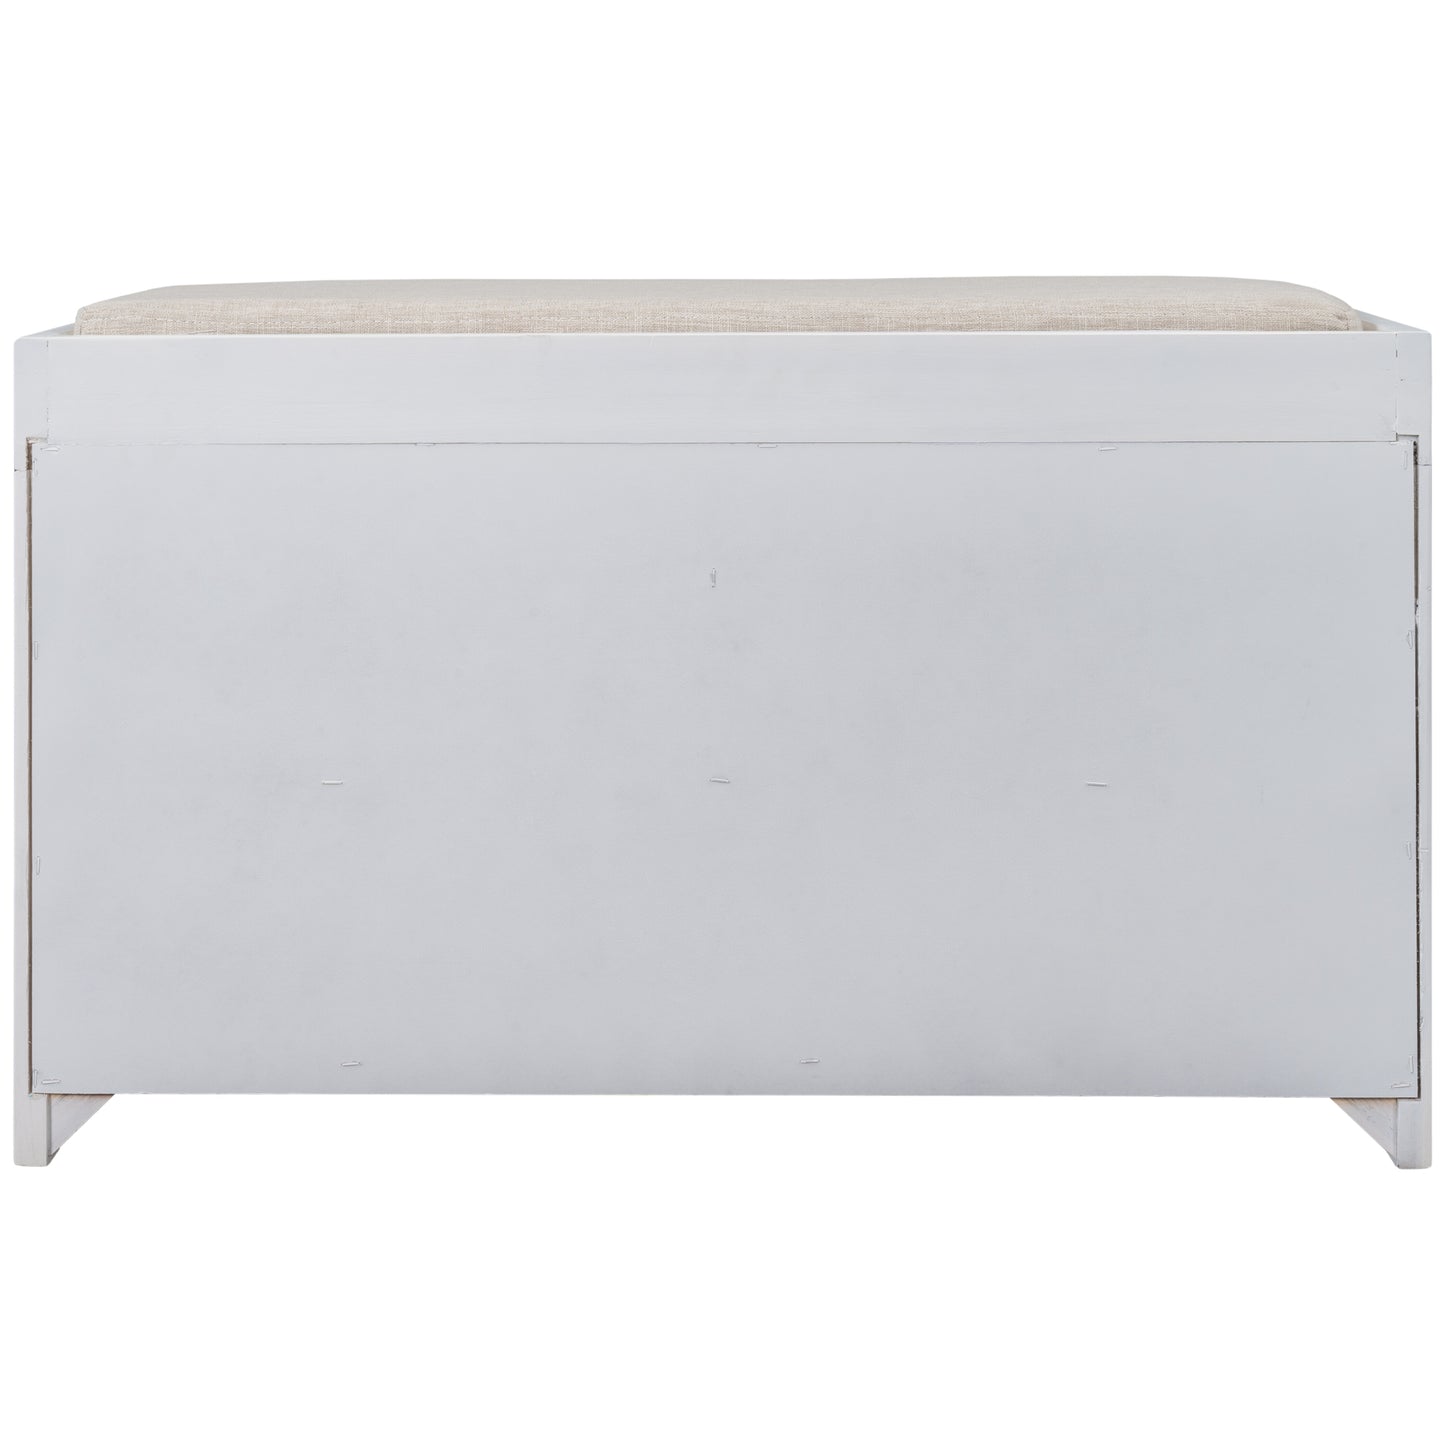 Storage Bench with Removable Basket and 2 Drawers, Fully Assembled Shoe Bench with Removable Cushion (White)